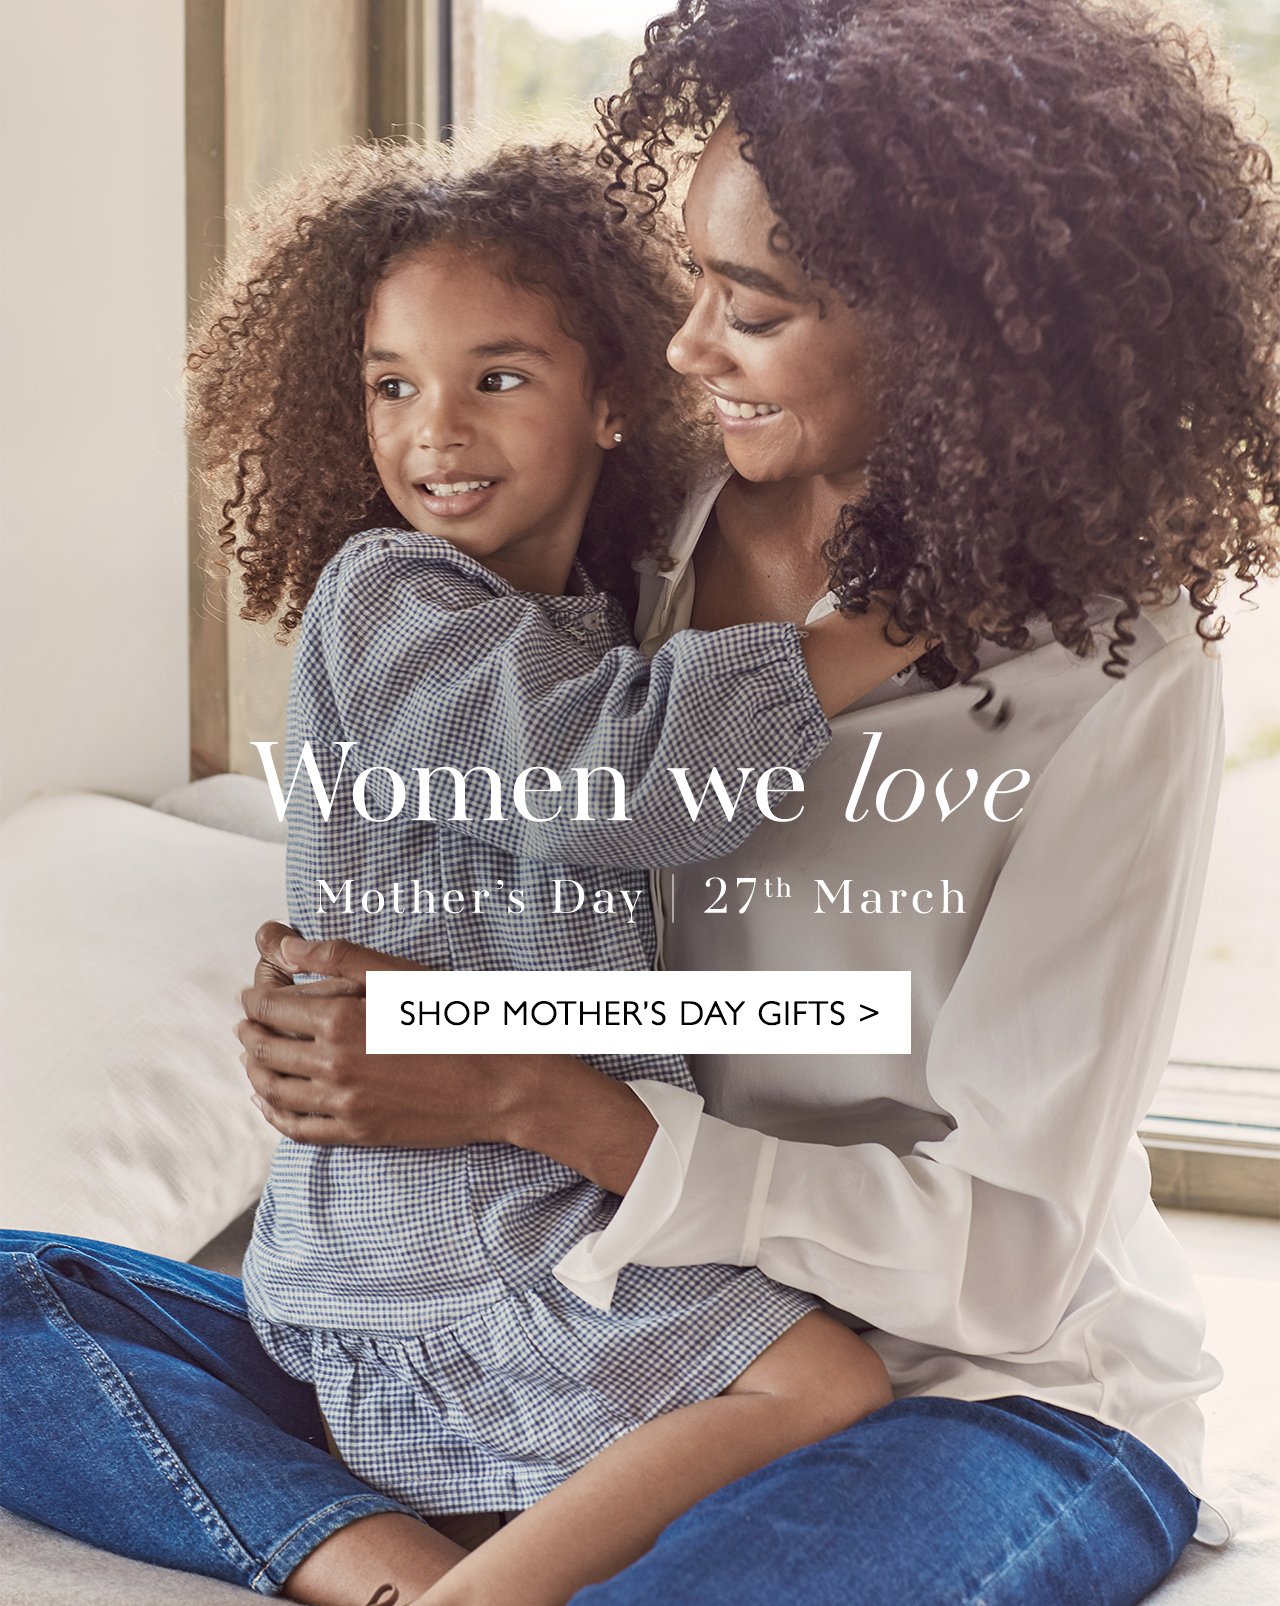 Women we love | SHOP MOTHER'S DAY GIFTS